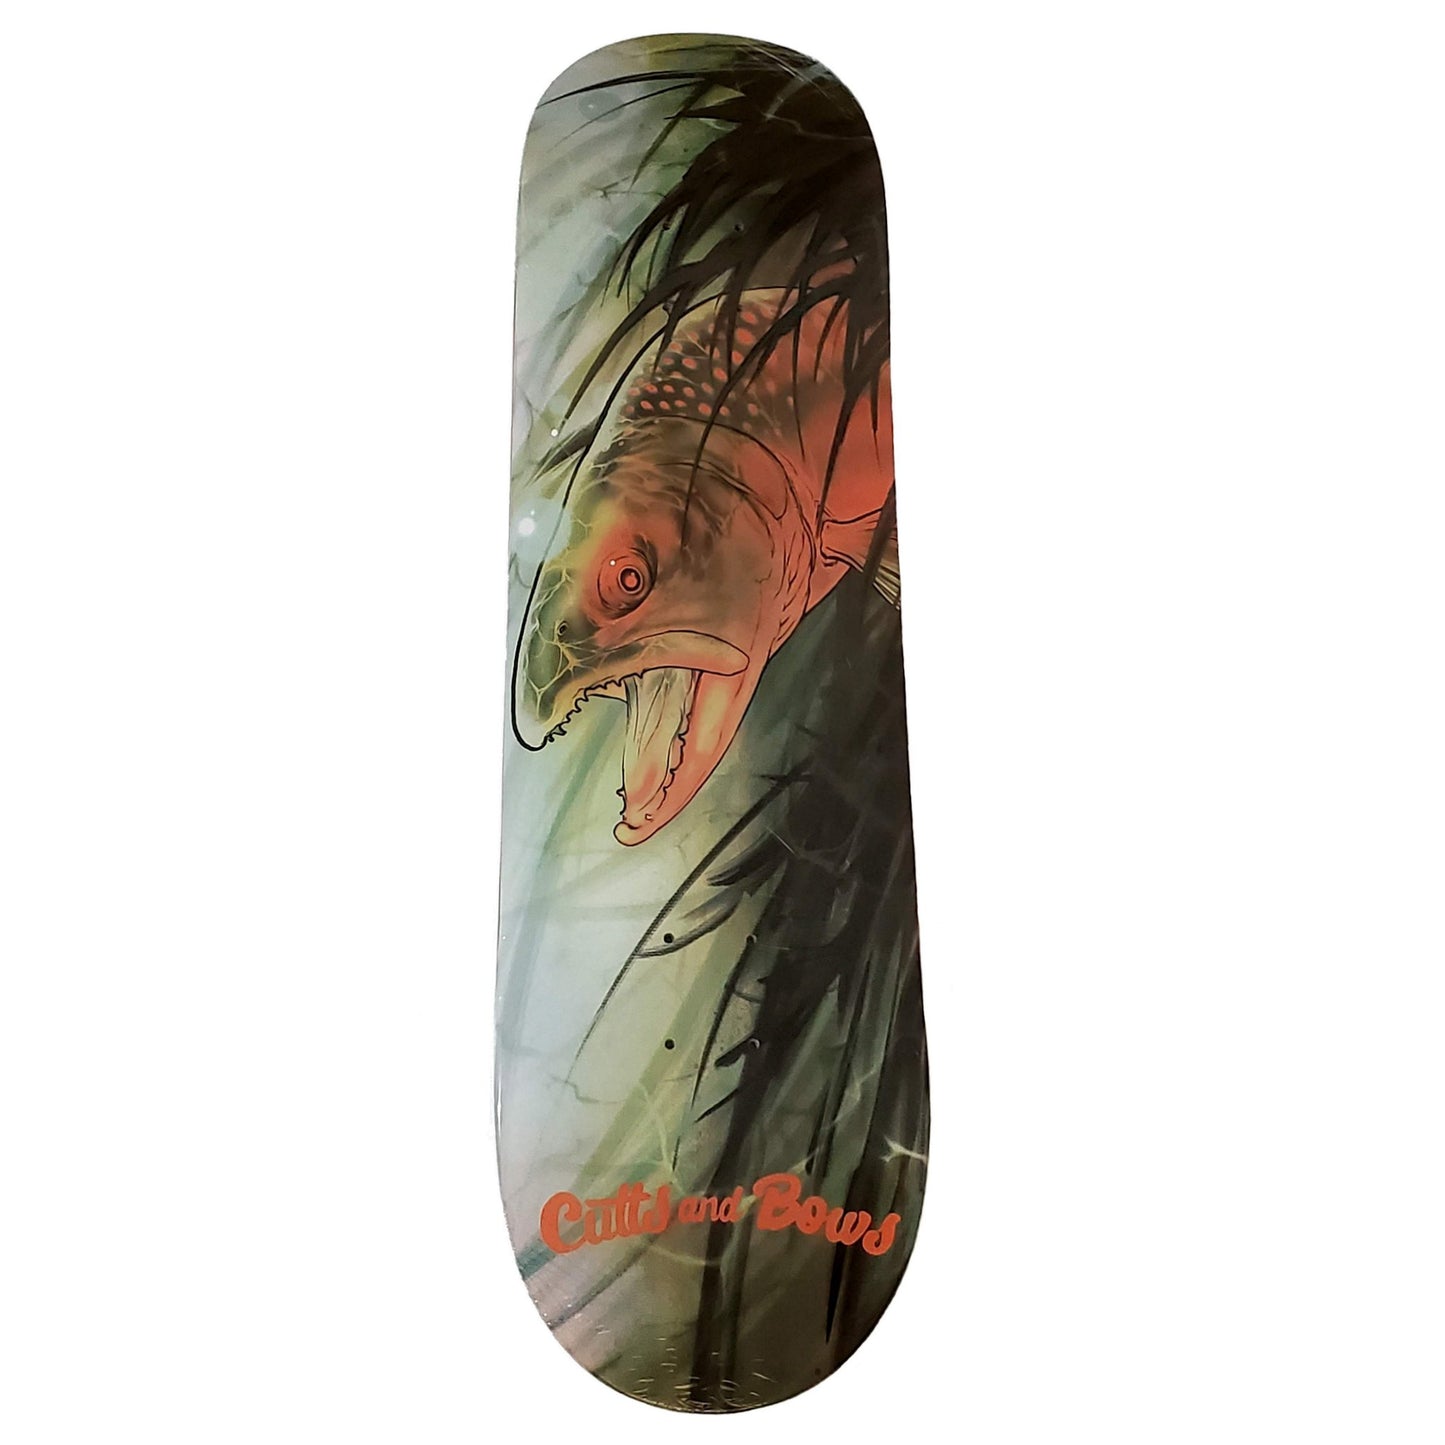 Cutts and Bows - "Bull Trout" - Skateboard Deck